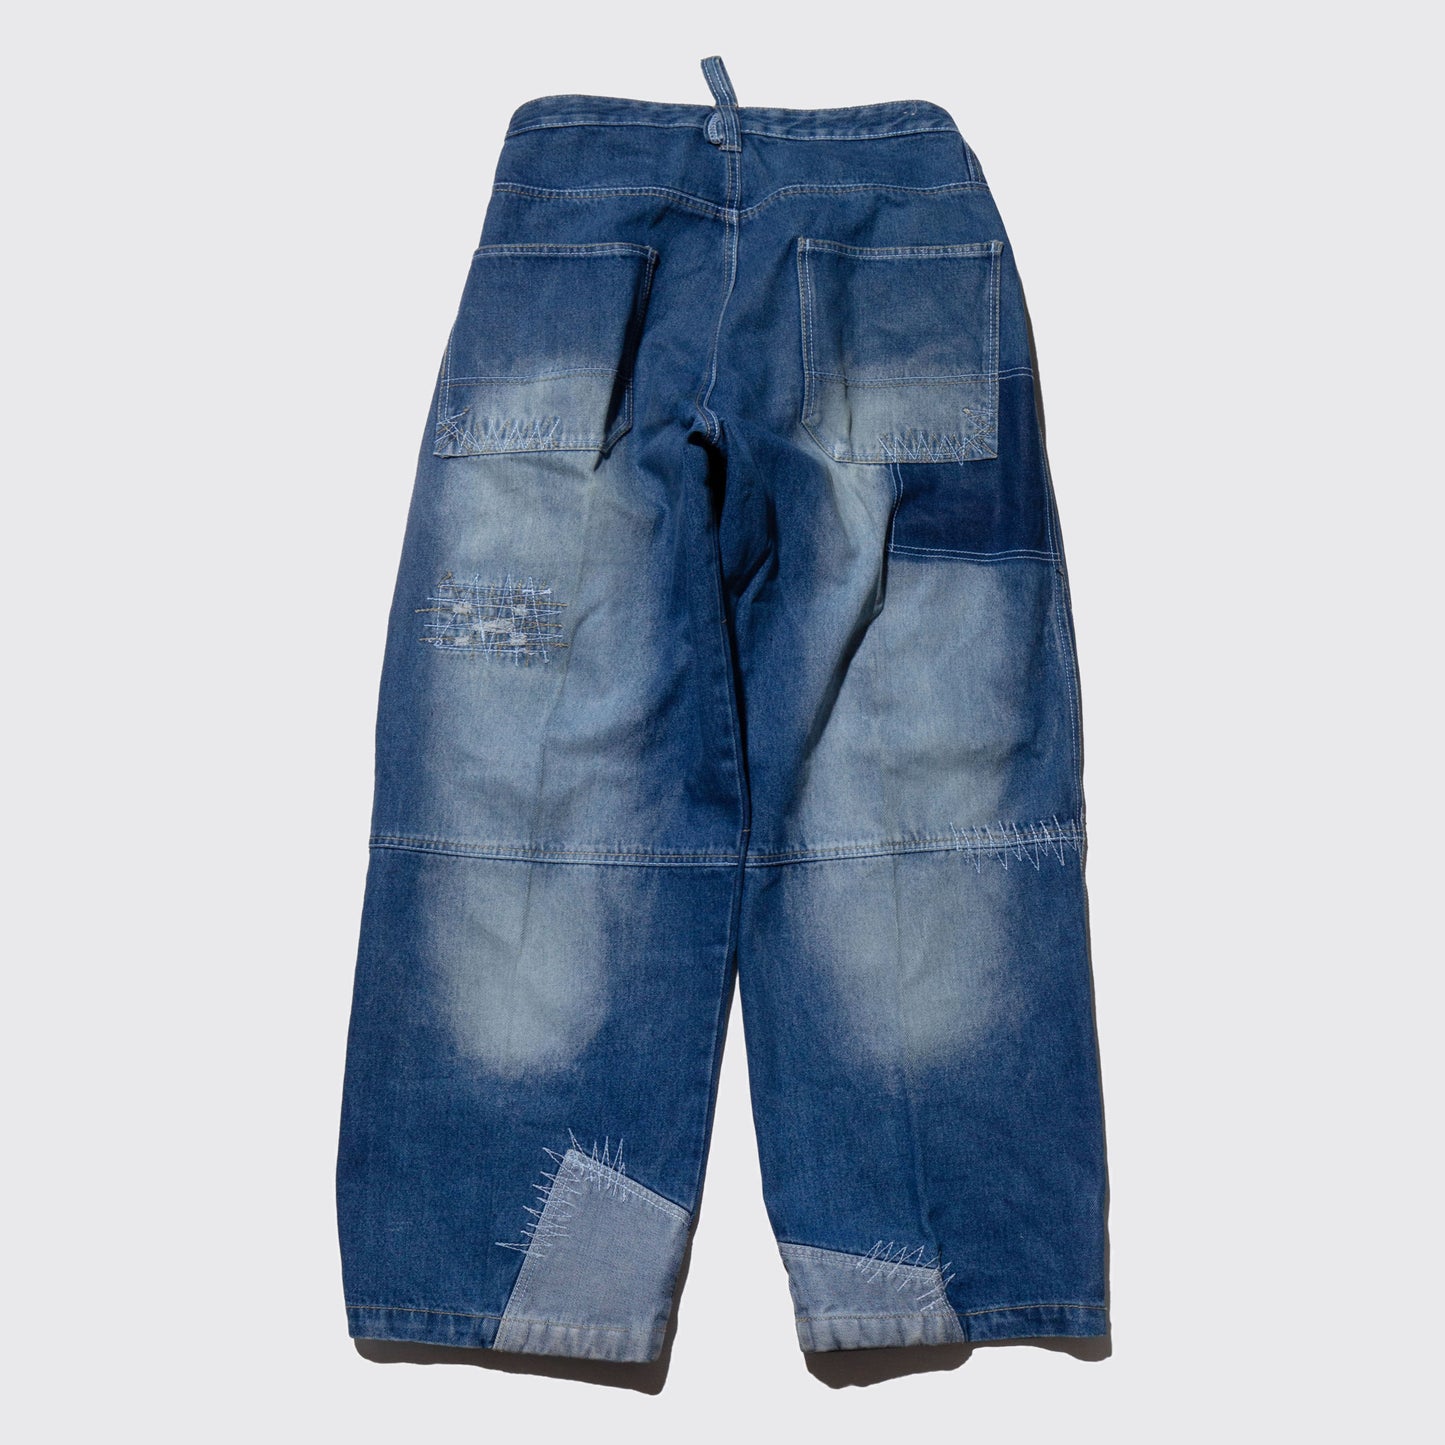 vintage repaired baggy jeans